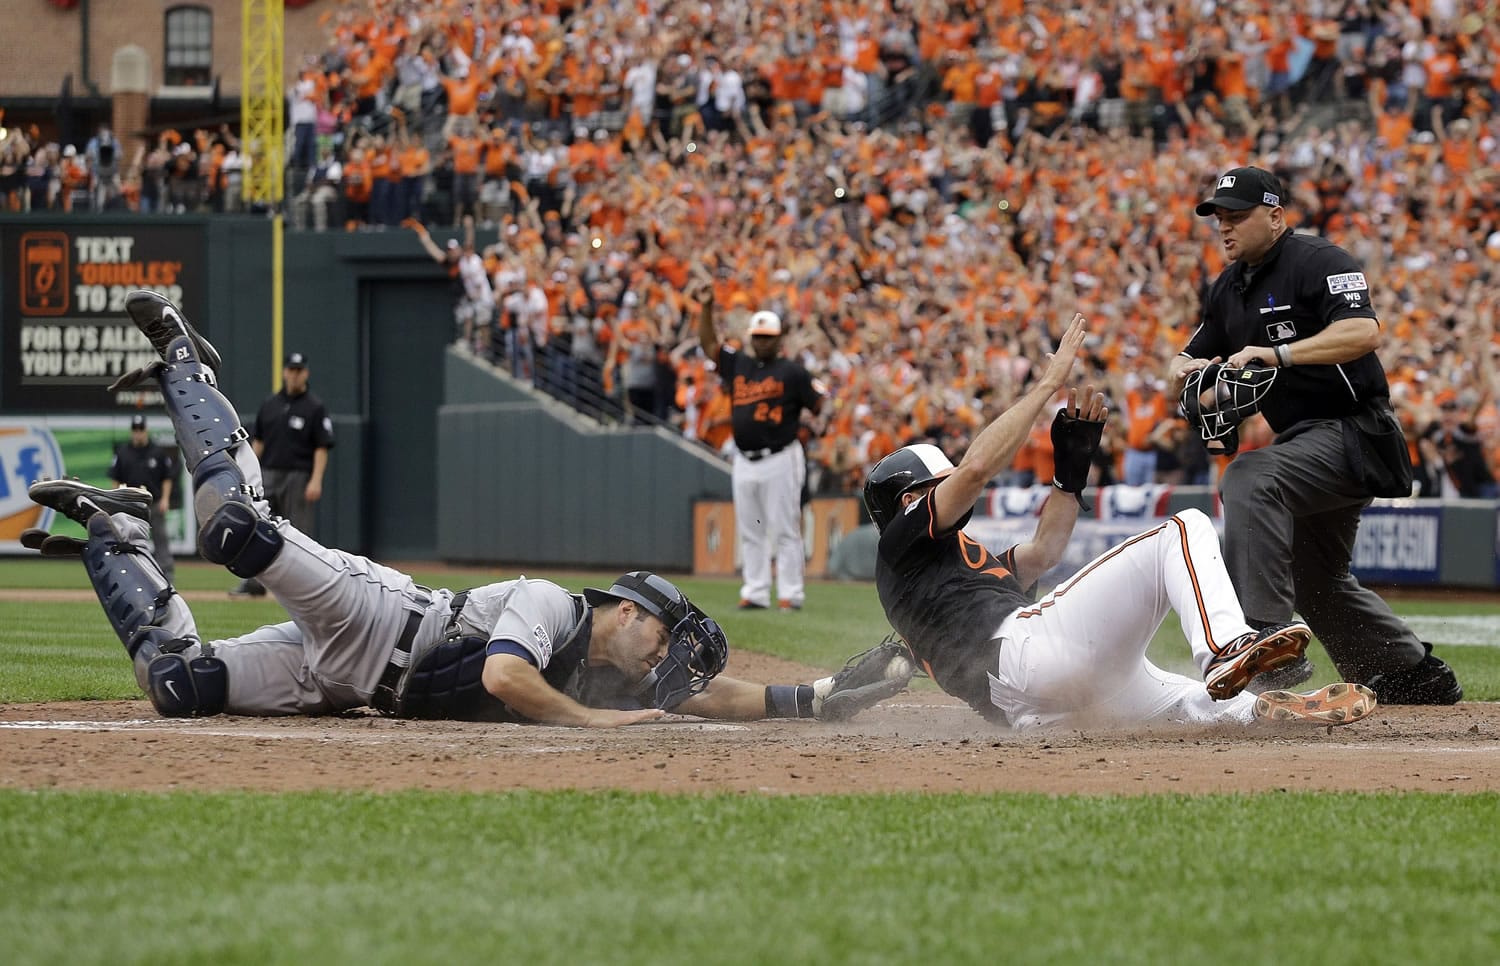 Detroit Tigers catcher Alex Avila, left, reaches but can't make the tag in time as Baltimore Orioles' J.J. Hardy scores on a double by Delmon Young in the eighth inning of Game 2 in the AL Division Series in Baltimore, Friday, Oct. 3, 2014. Baltimore won 7-6.